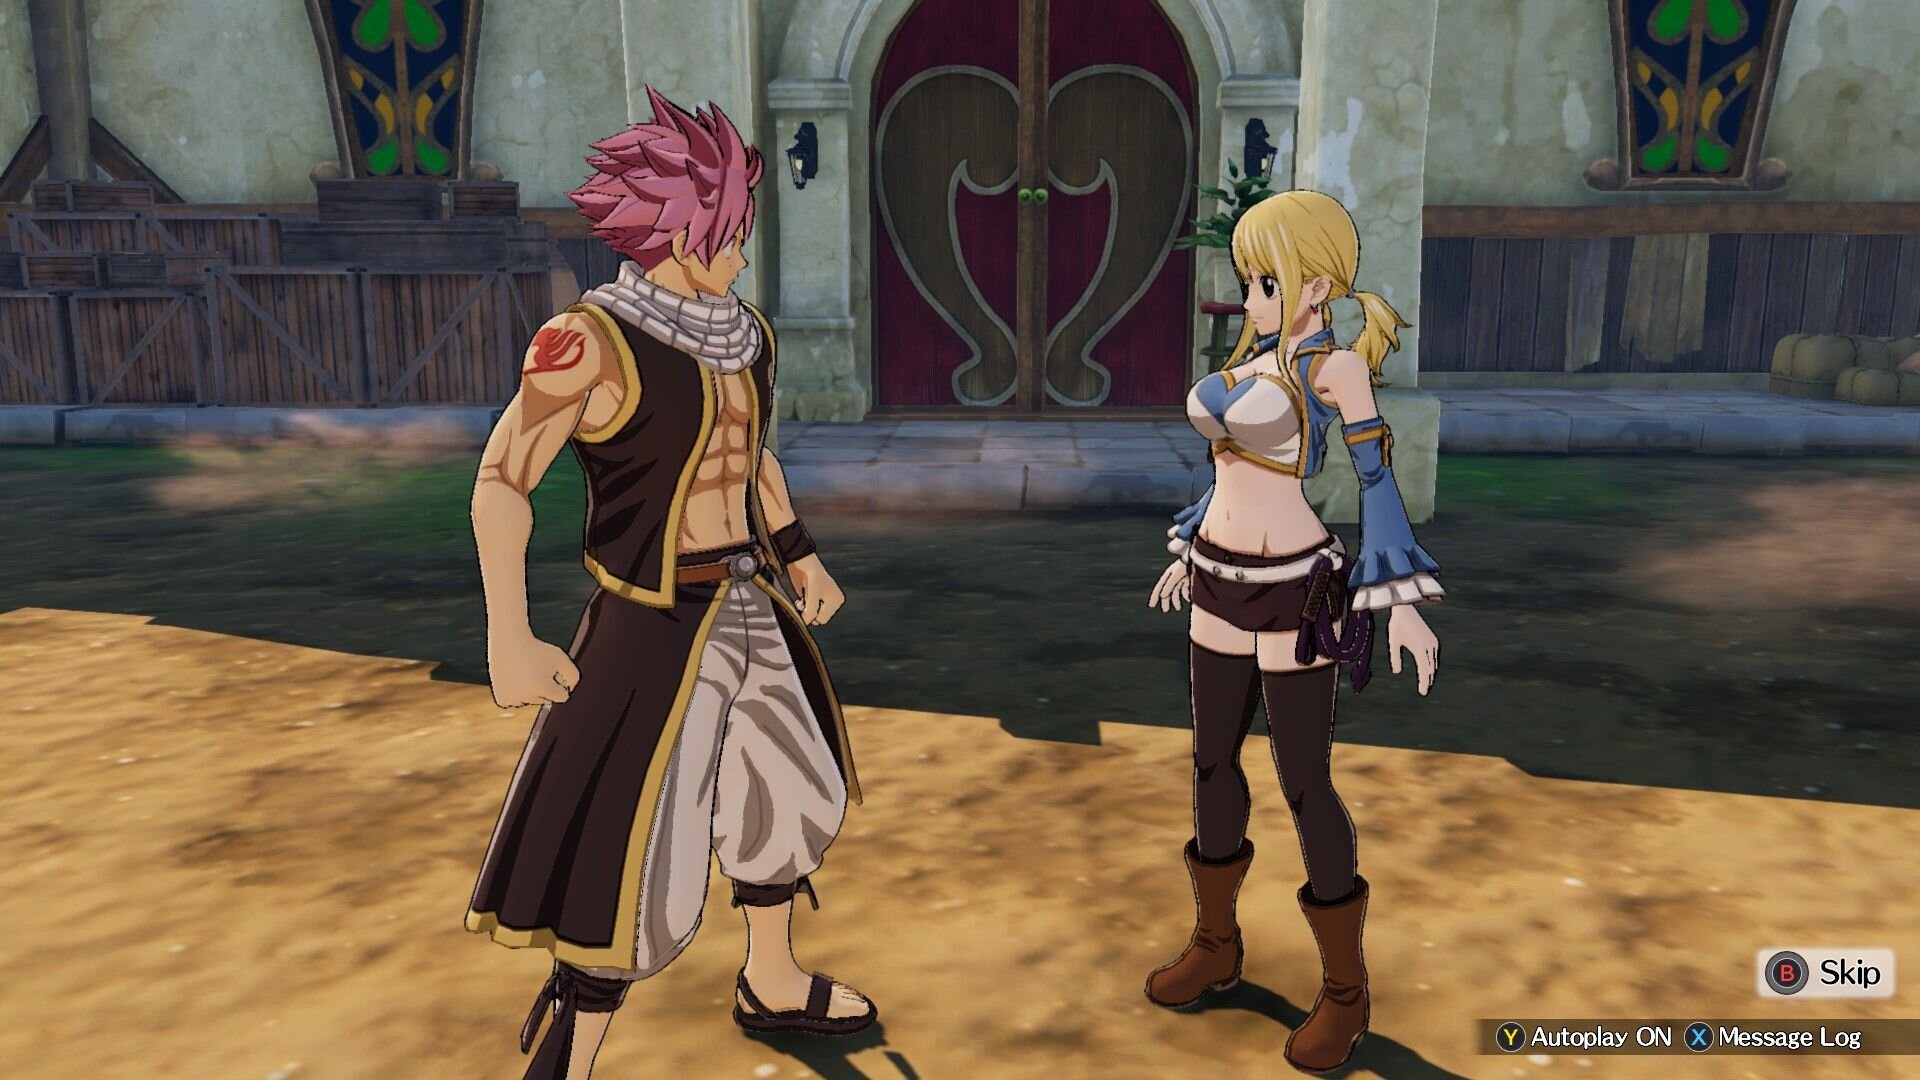 Fairy Tail Teases Original Story Scenarios And Battle System In New Trailer